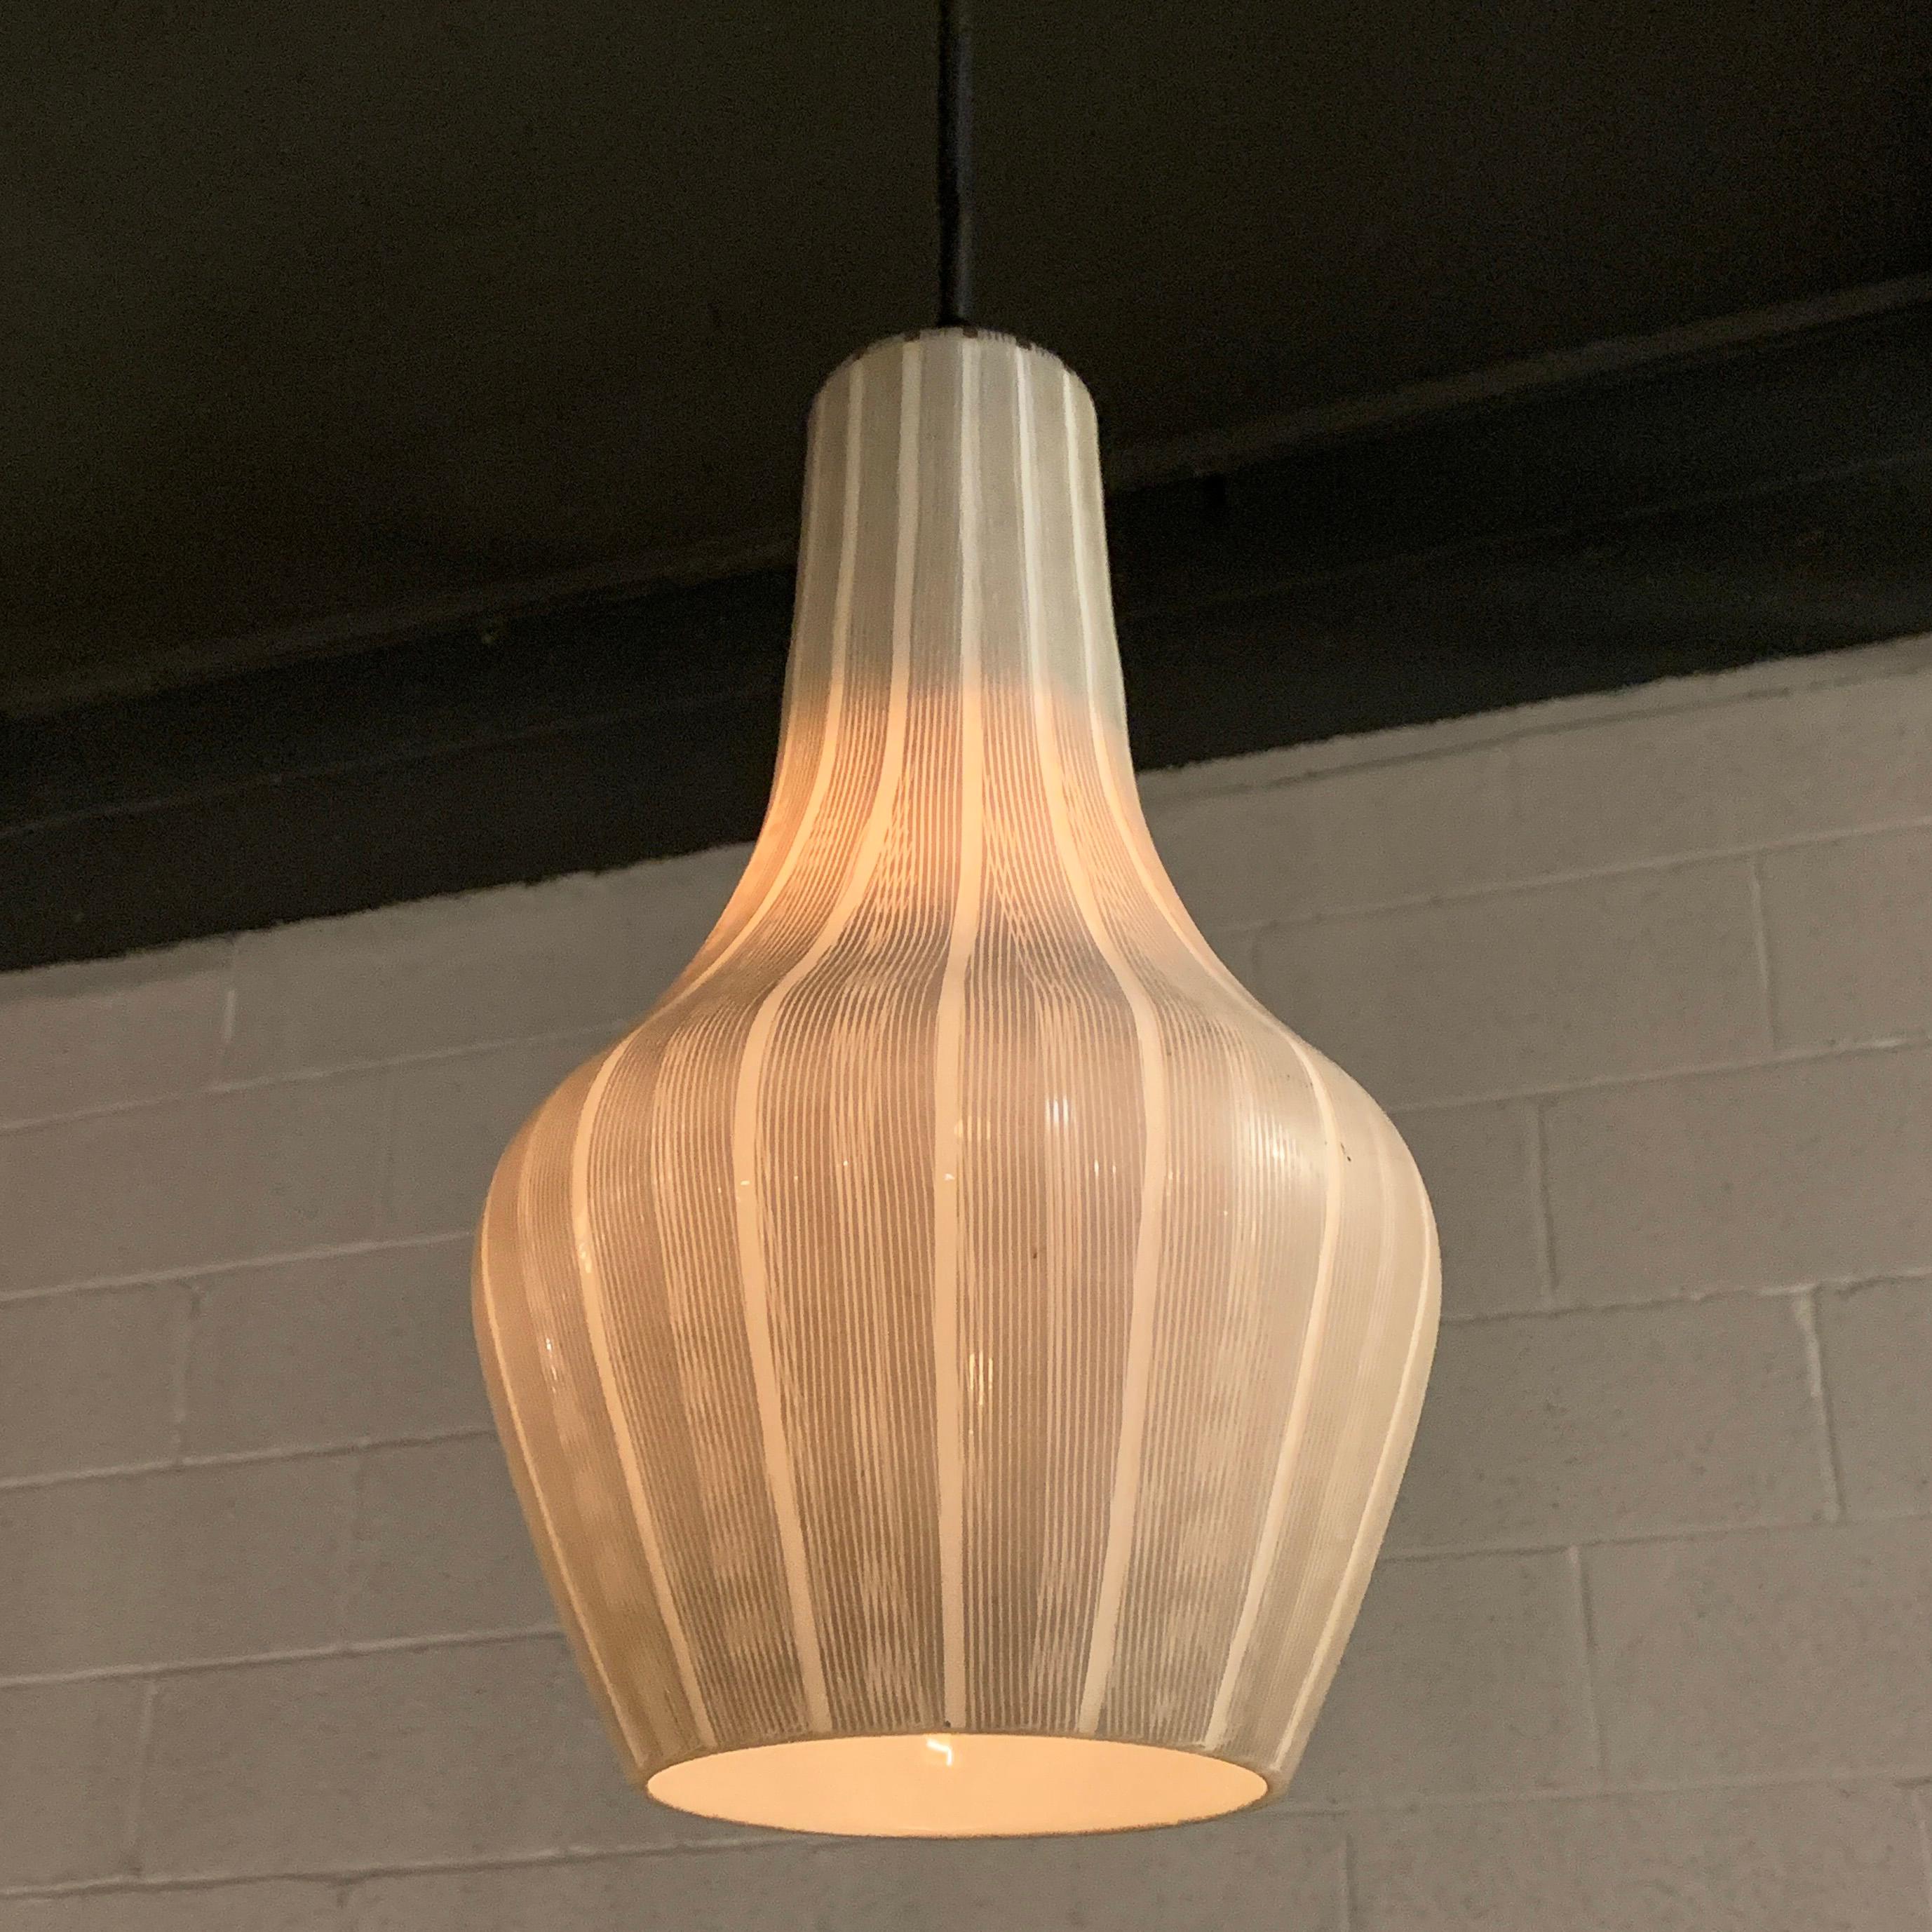 Scandinavian Modern, art glass pendant light features a finely striped black and white exterior and shapely form. The pendant is newly wired with 60 inches of cloth cord to accept up to a 100 watt, medium socket bulb. Marked Made In Sweden.